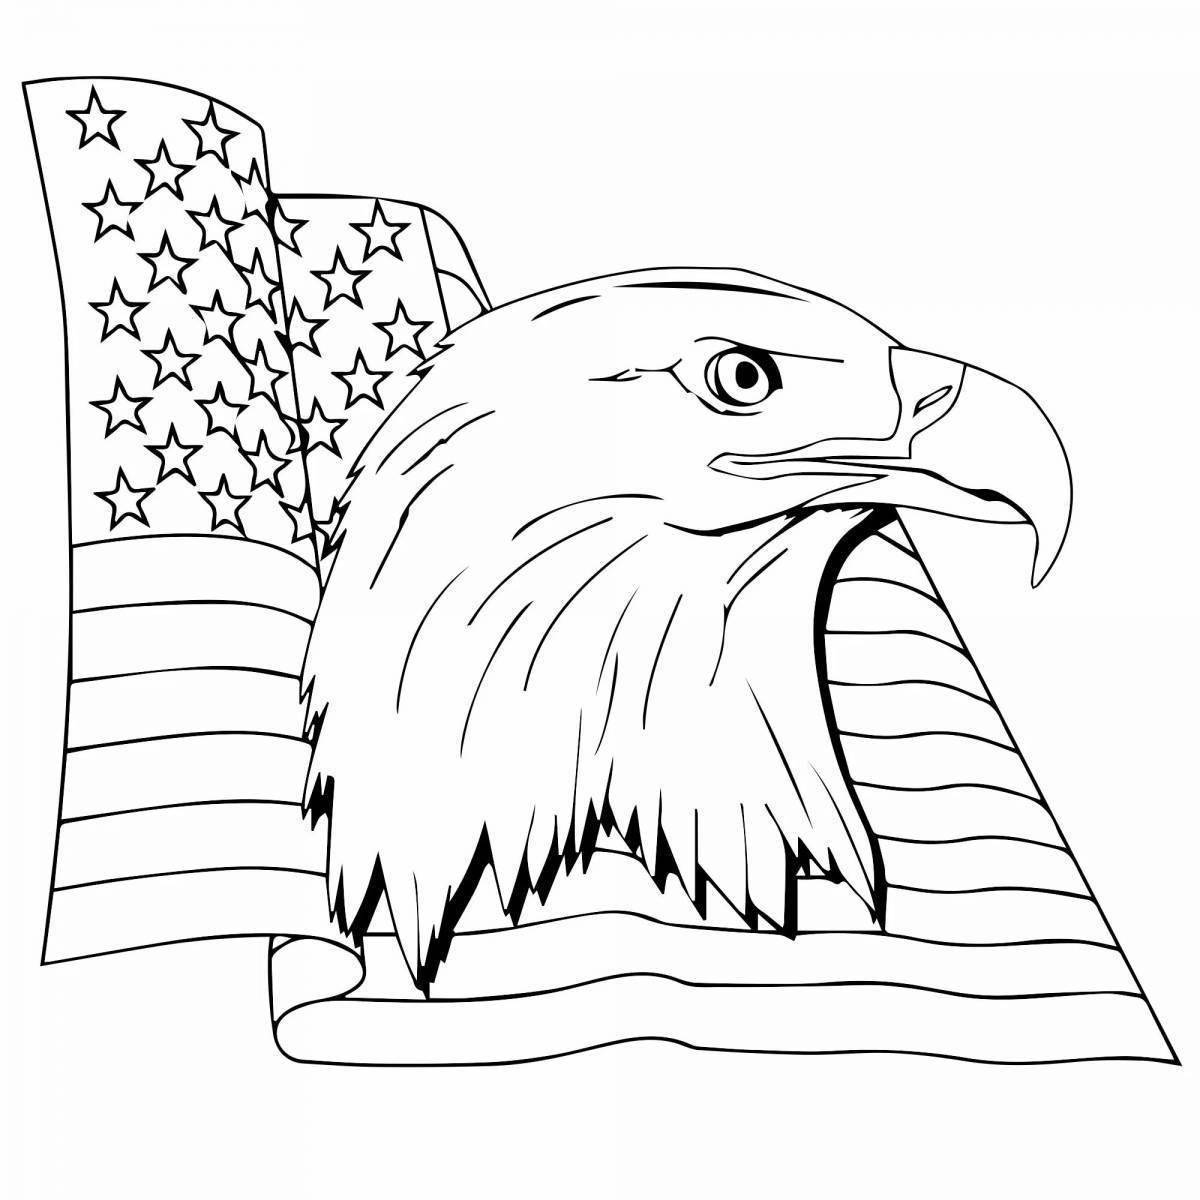 Luxurious eagle coloring book for kids